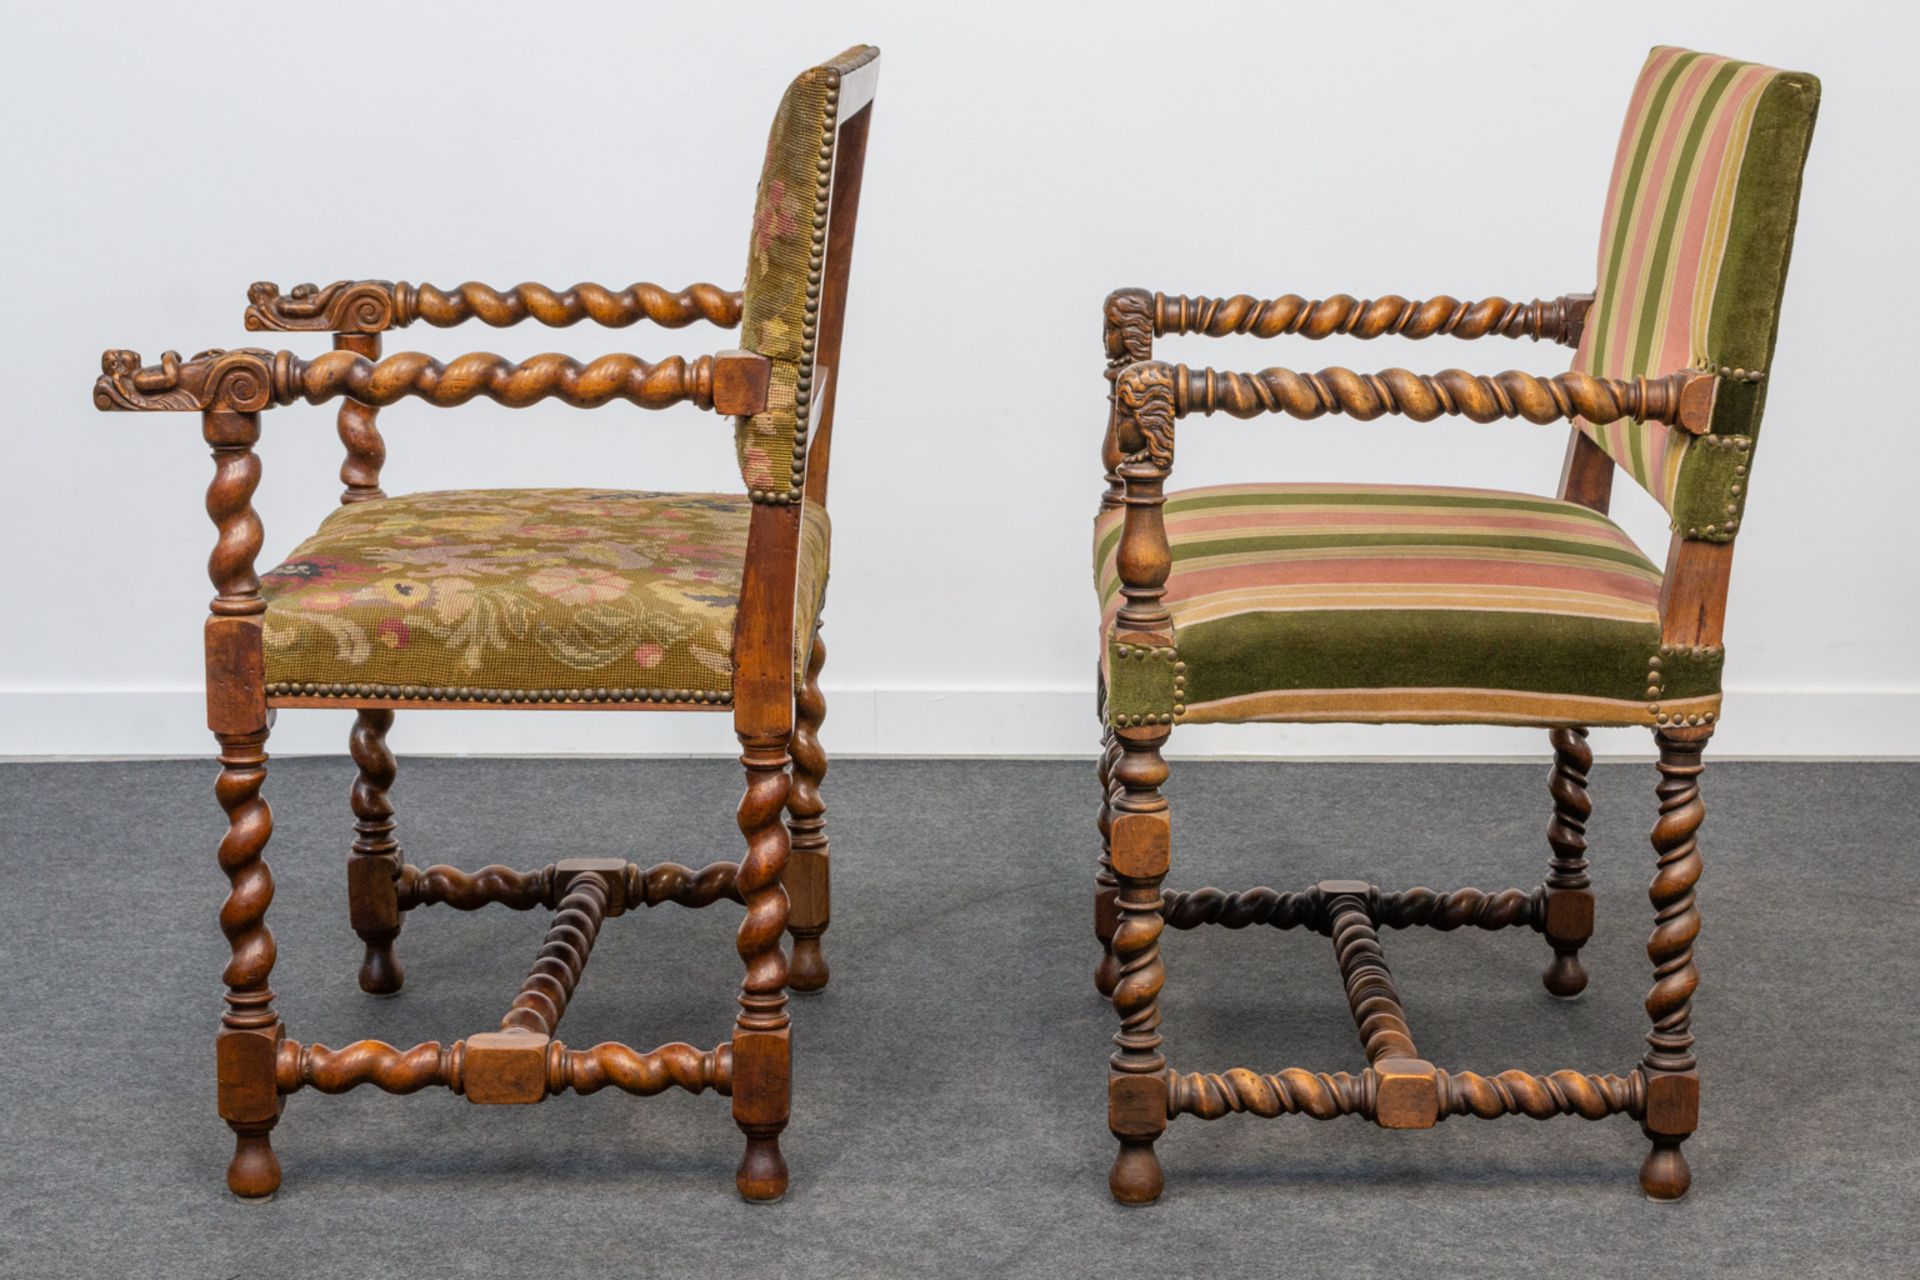 A collection of 2 castle chairs with sculptured handles. 19th century. (92 x 63 x 54 cm) - Bild 6 aus 18